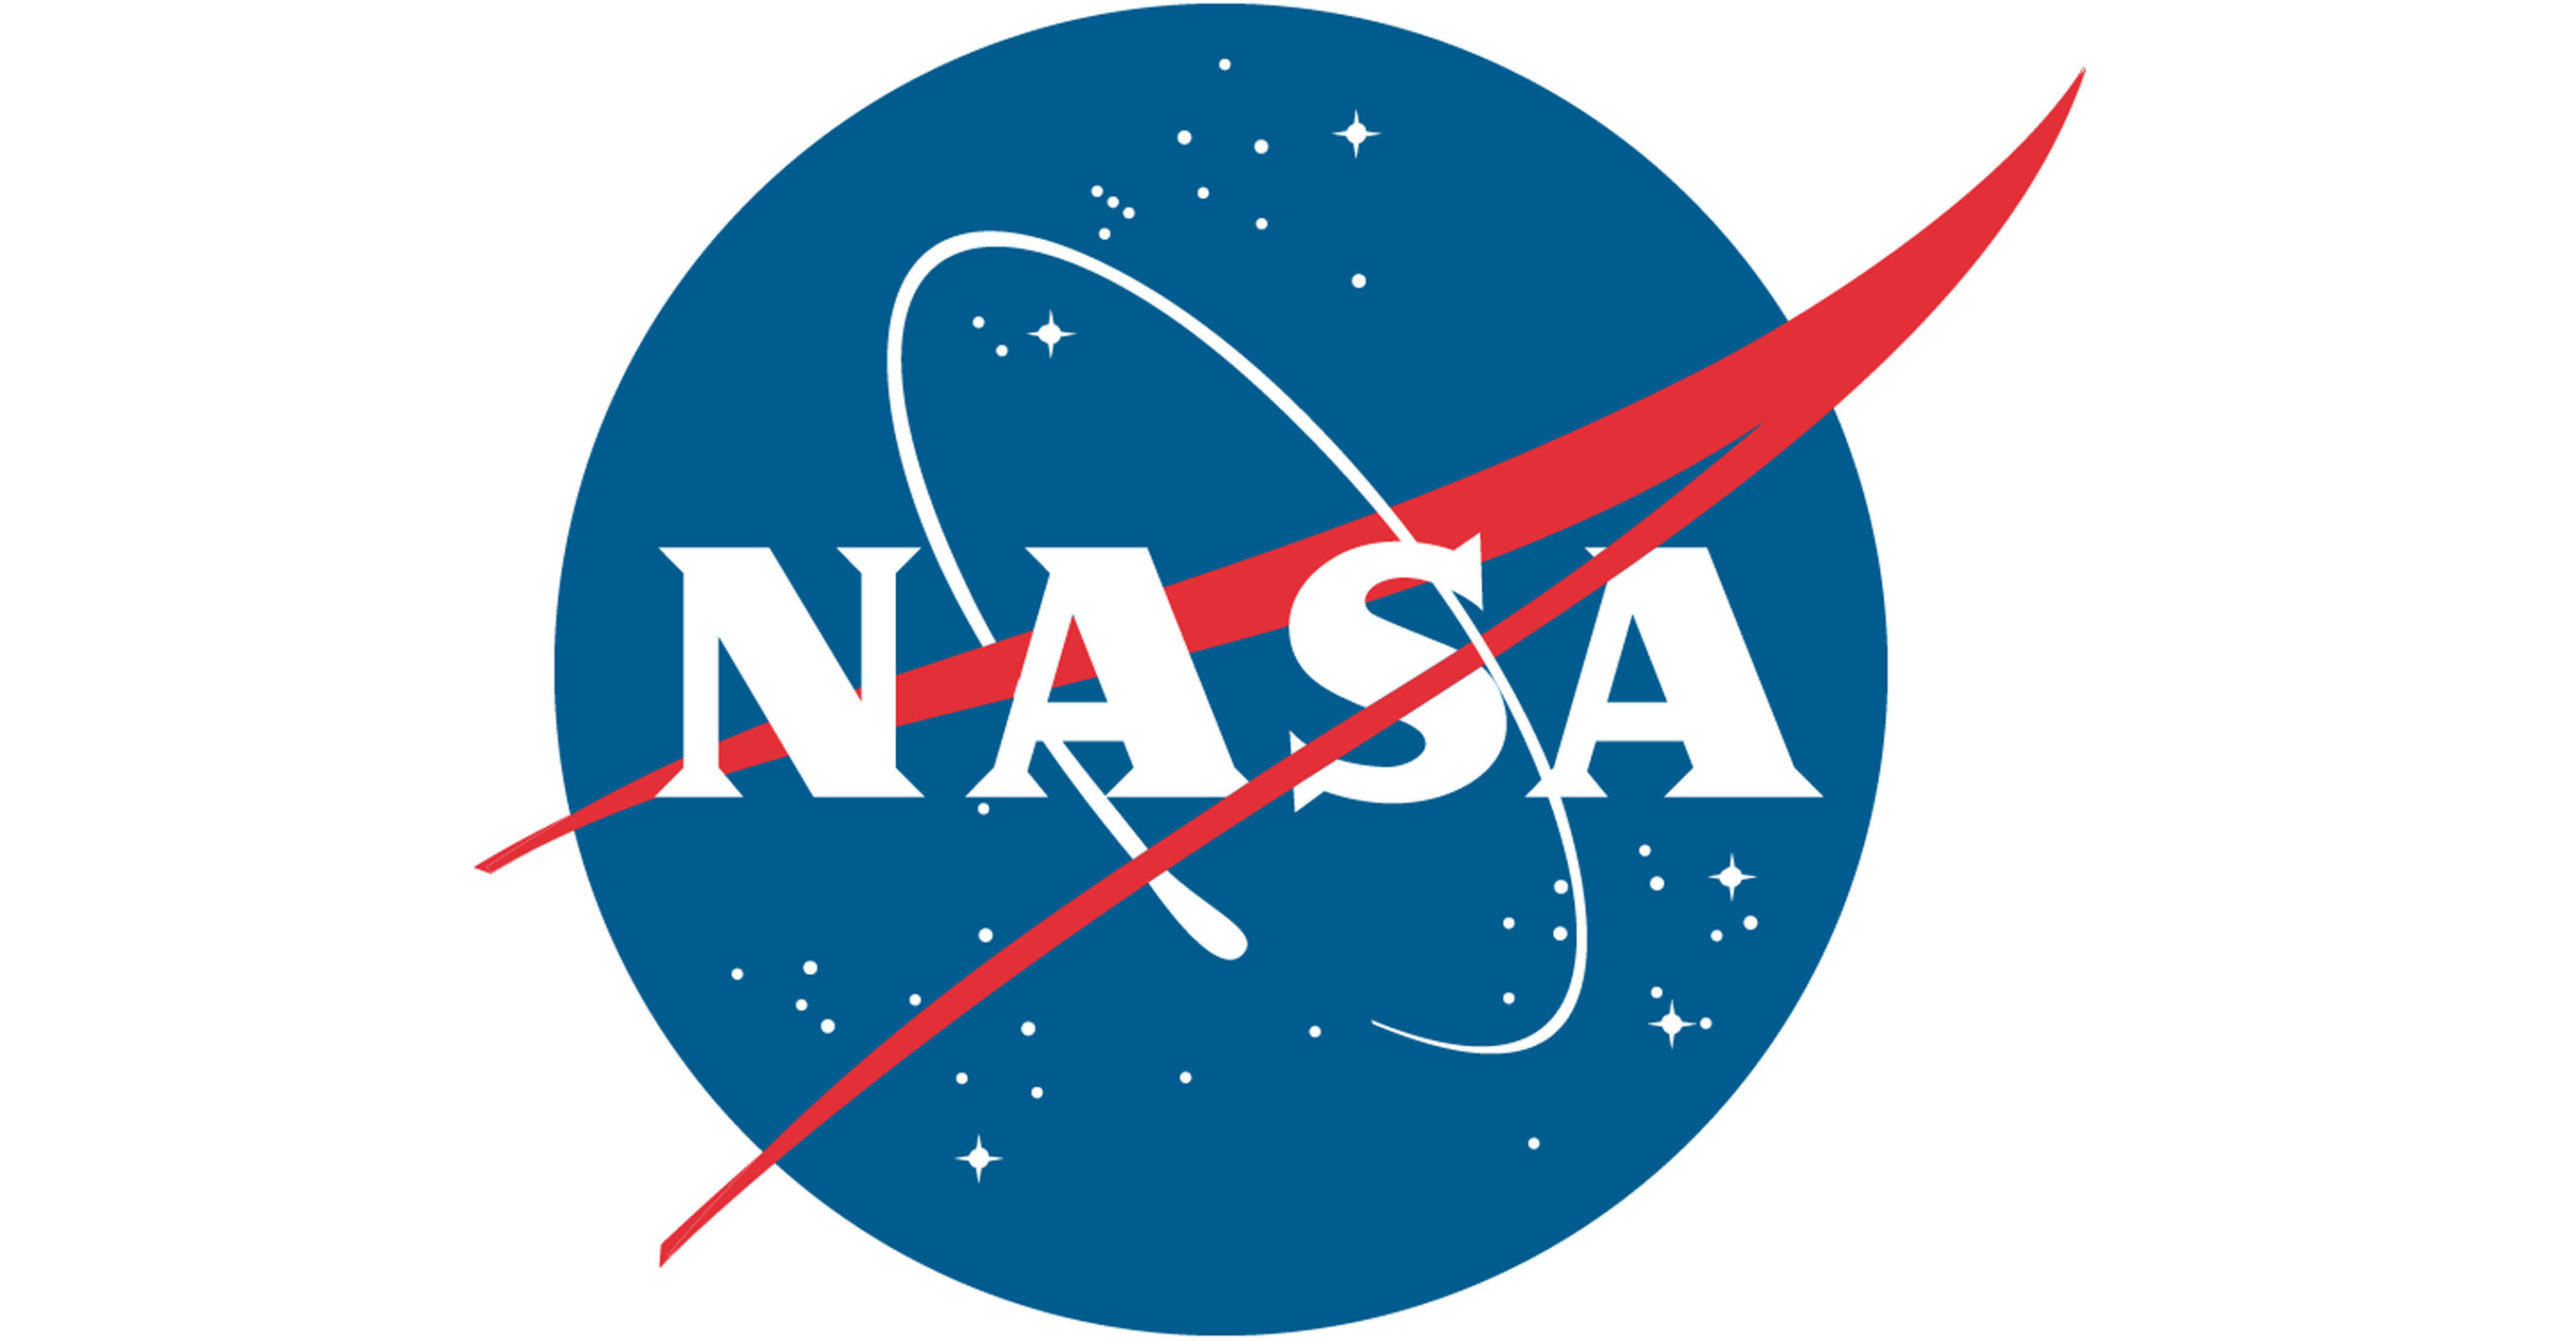 Indian-American Bhavya Lal is now commanded by NASA